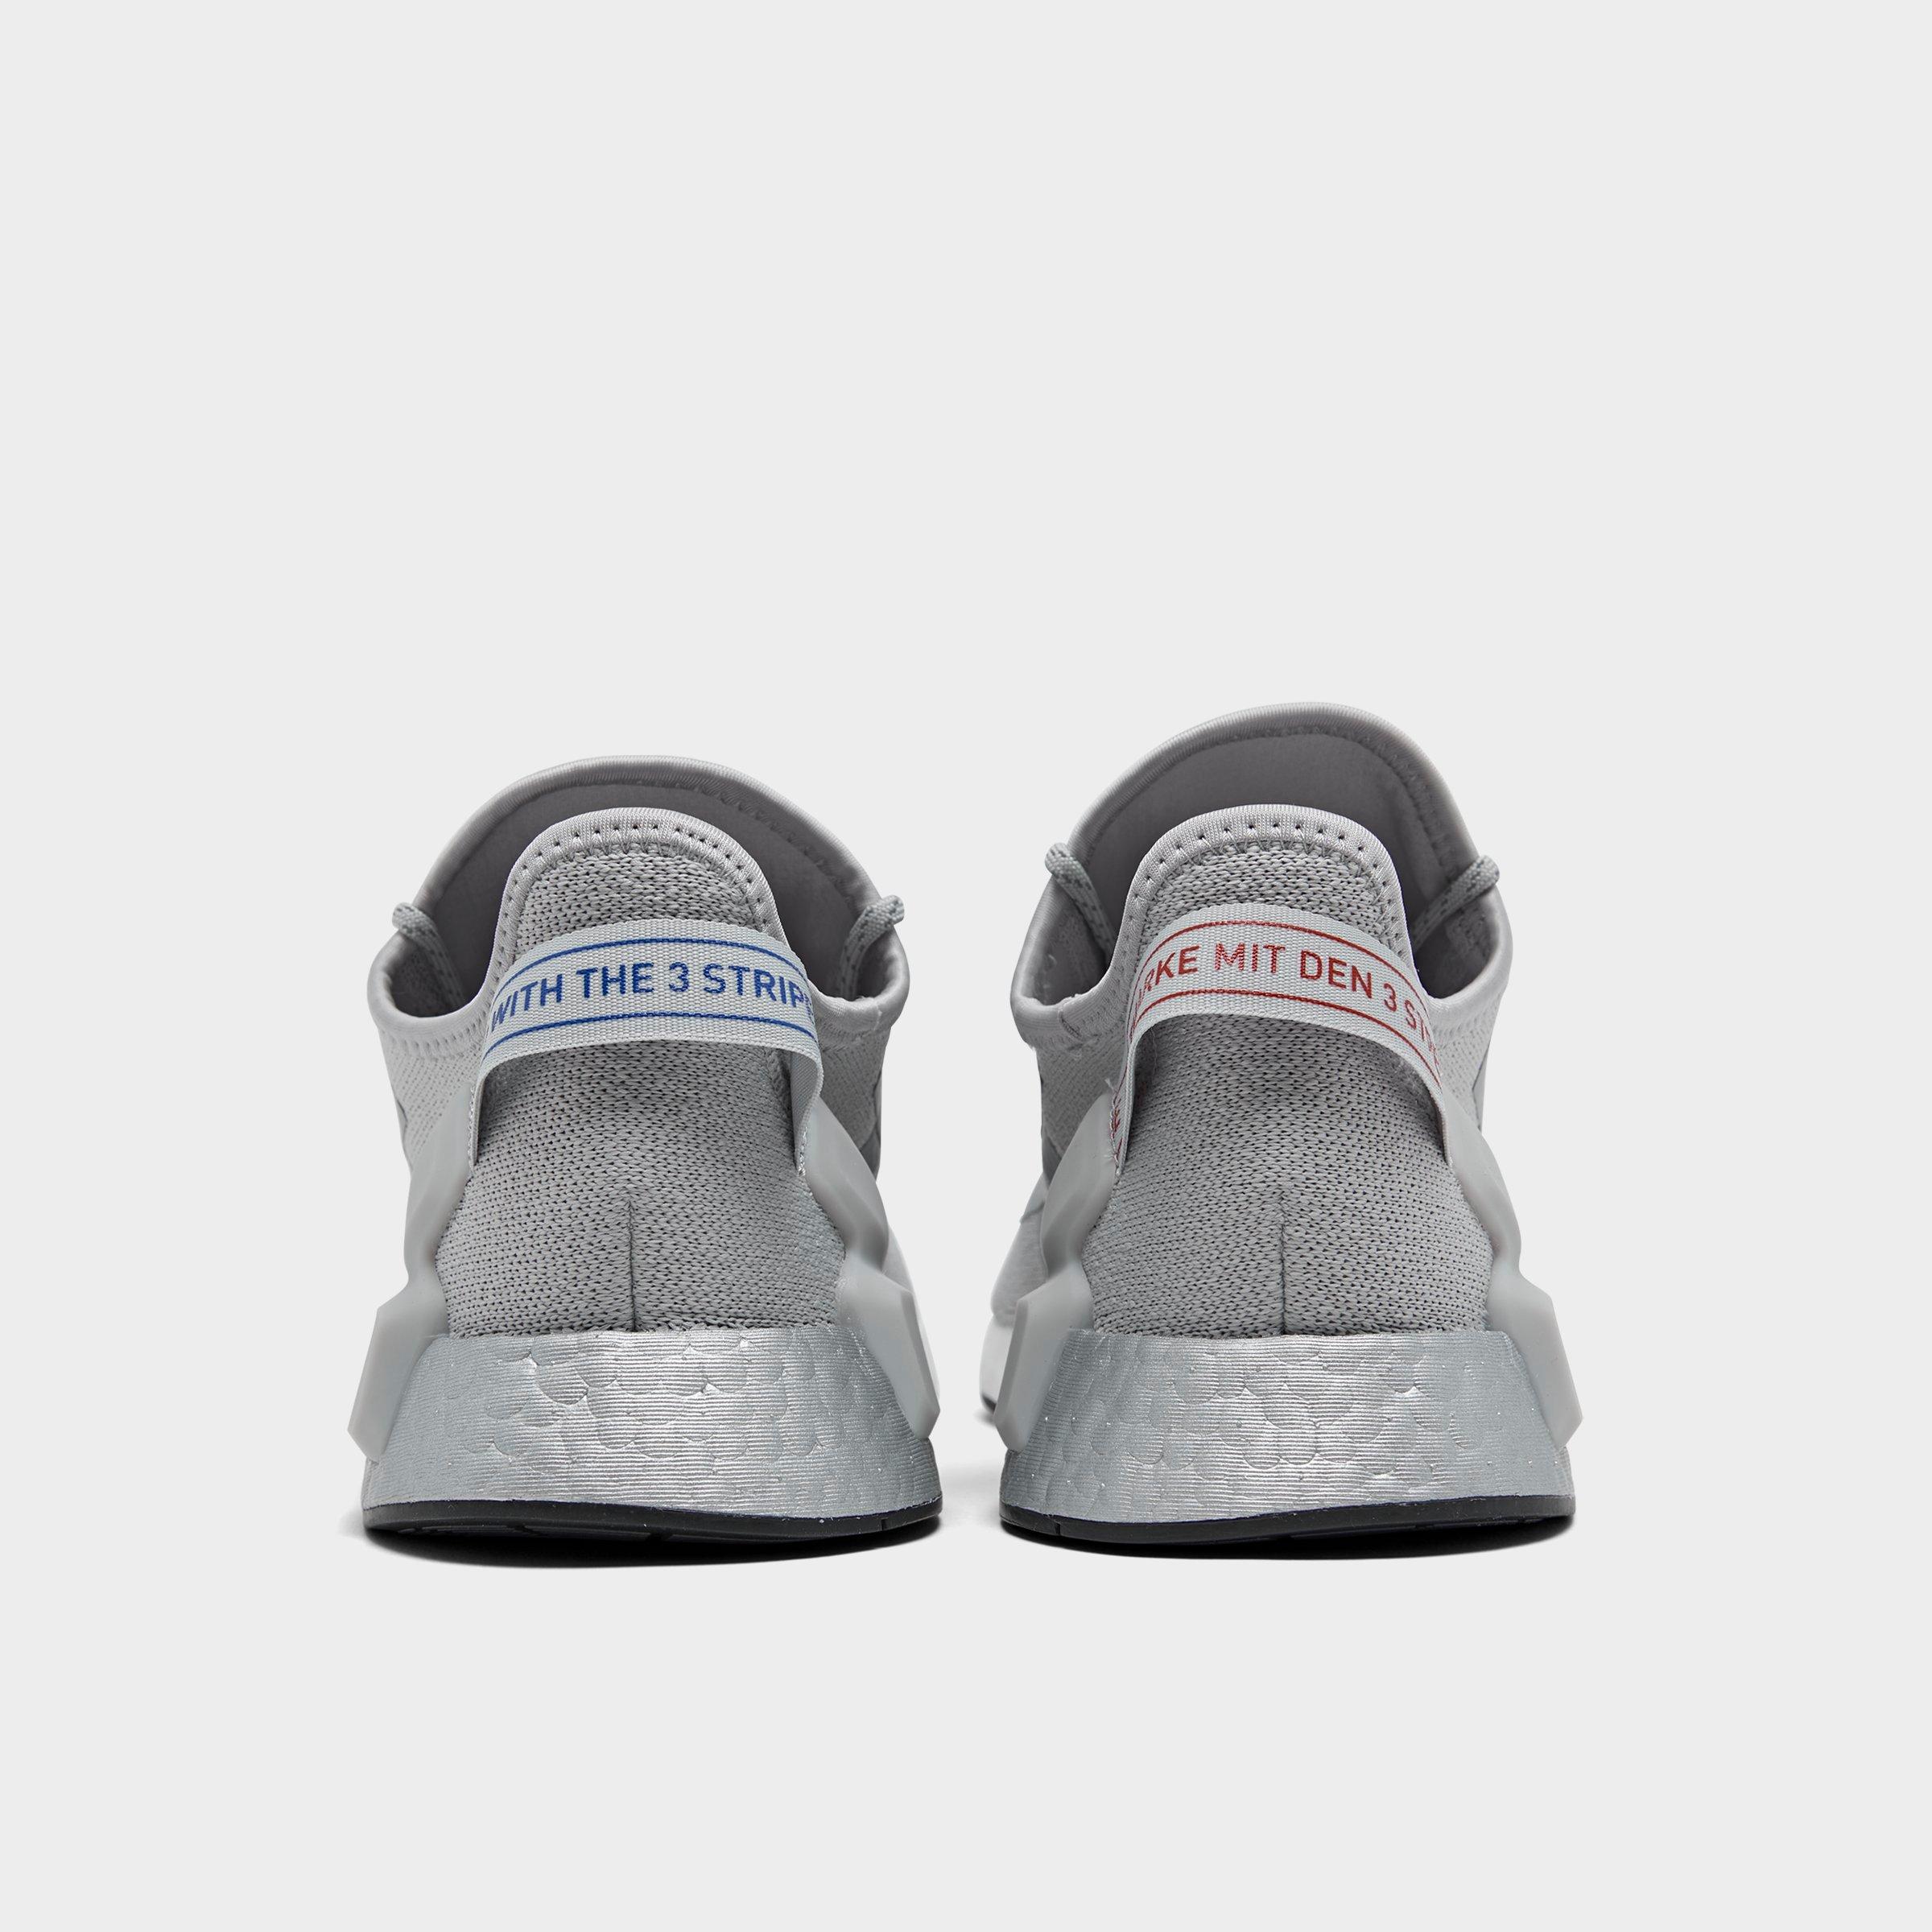 adidas NMD XR1 Primeknit November 11th Releases